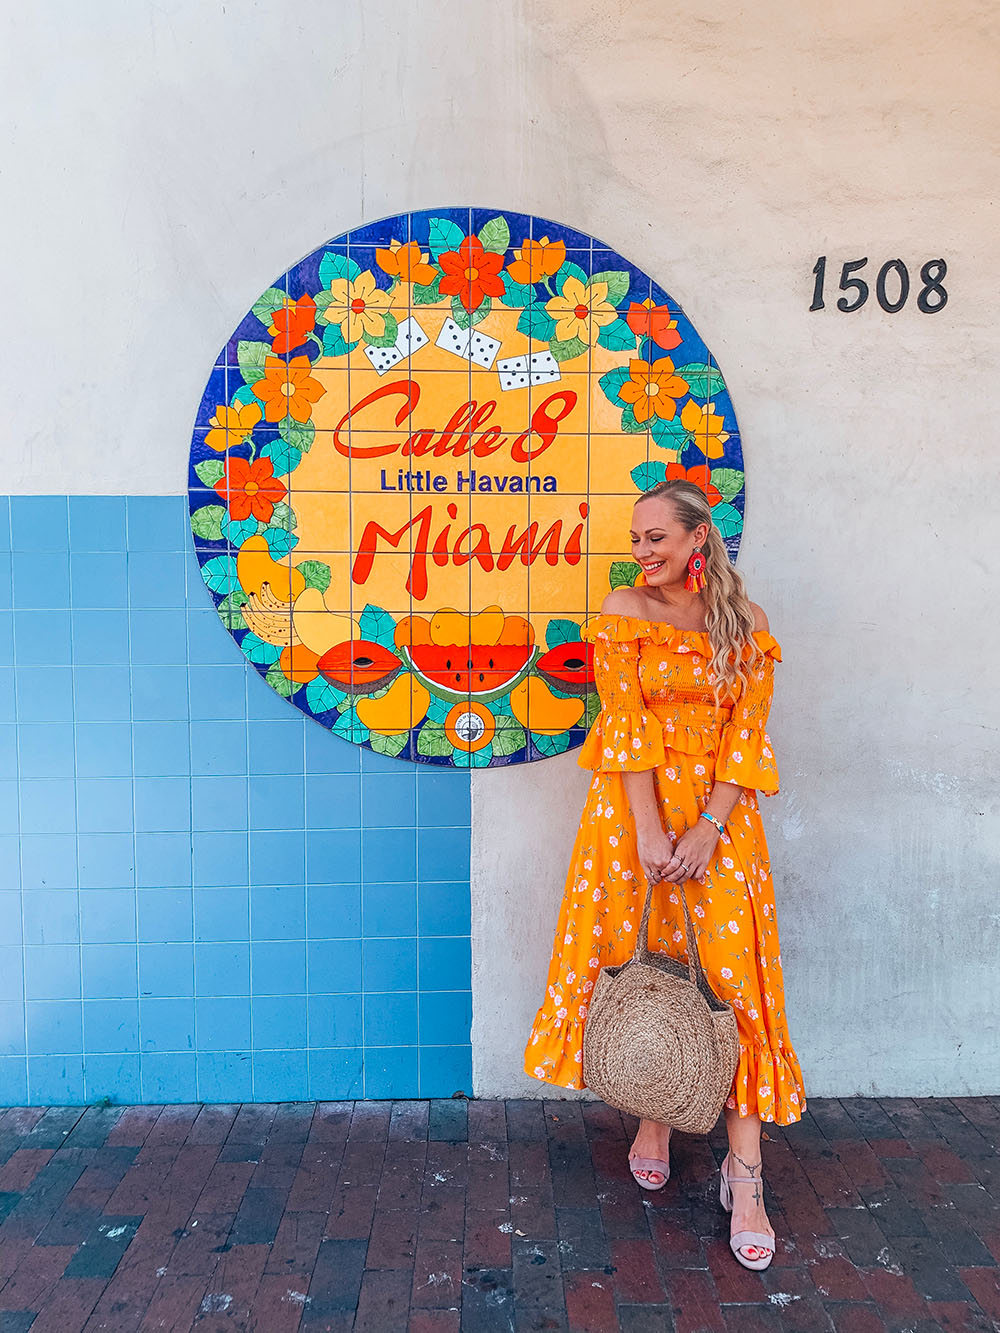 So you've planned a wonderful 3 day trip to Miami and now you're looking for the perfect itinerary for your visit… well, this guide is for you! I’ve put together the ultimate 3 days in Miami itinerary that will have you seeing and experiencing all of Miami’s top sights and attractions. From South Beach & Ocean Drive to Little Havana & Wynwood, you don’t want to miss this guide to the perfect long weekend in Miami. Pictured here: Explore Little Havana